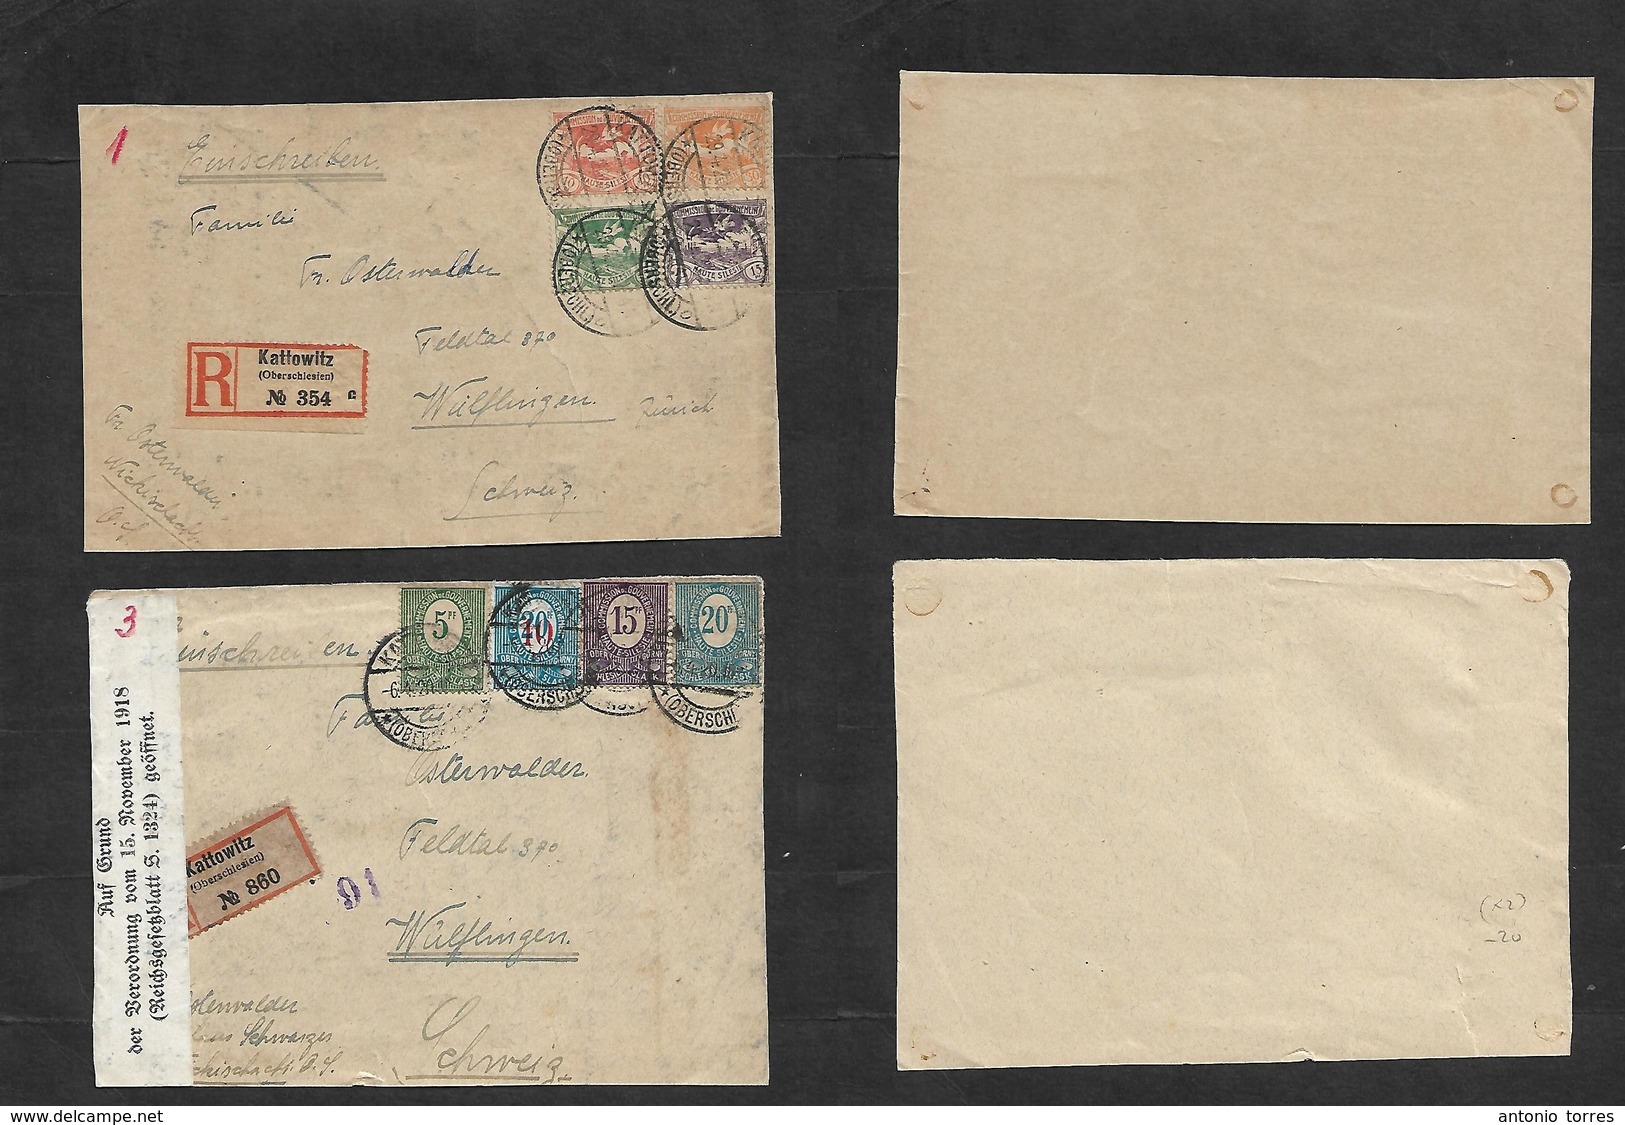 Silesia. 1920 (6-29 April) Poland, Kattowitz - Switzerland, Wulflingen. Two Multifkd Fronts, One Registered. The Other F - Silésie